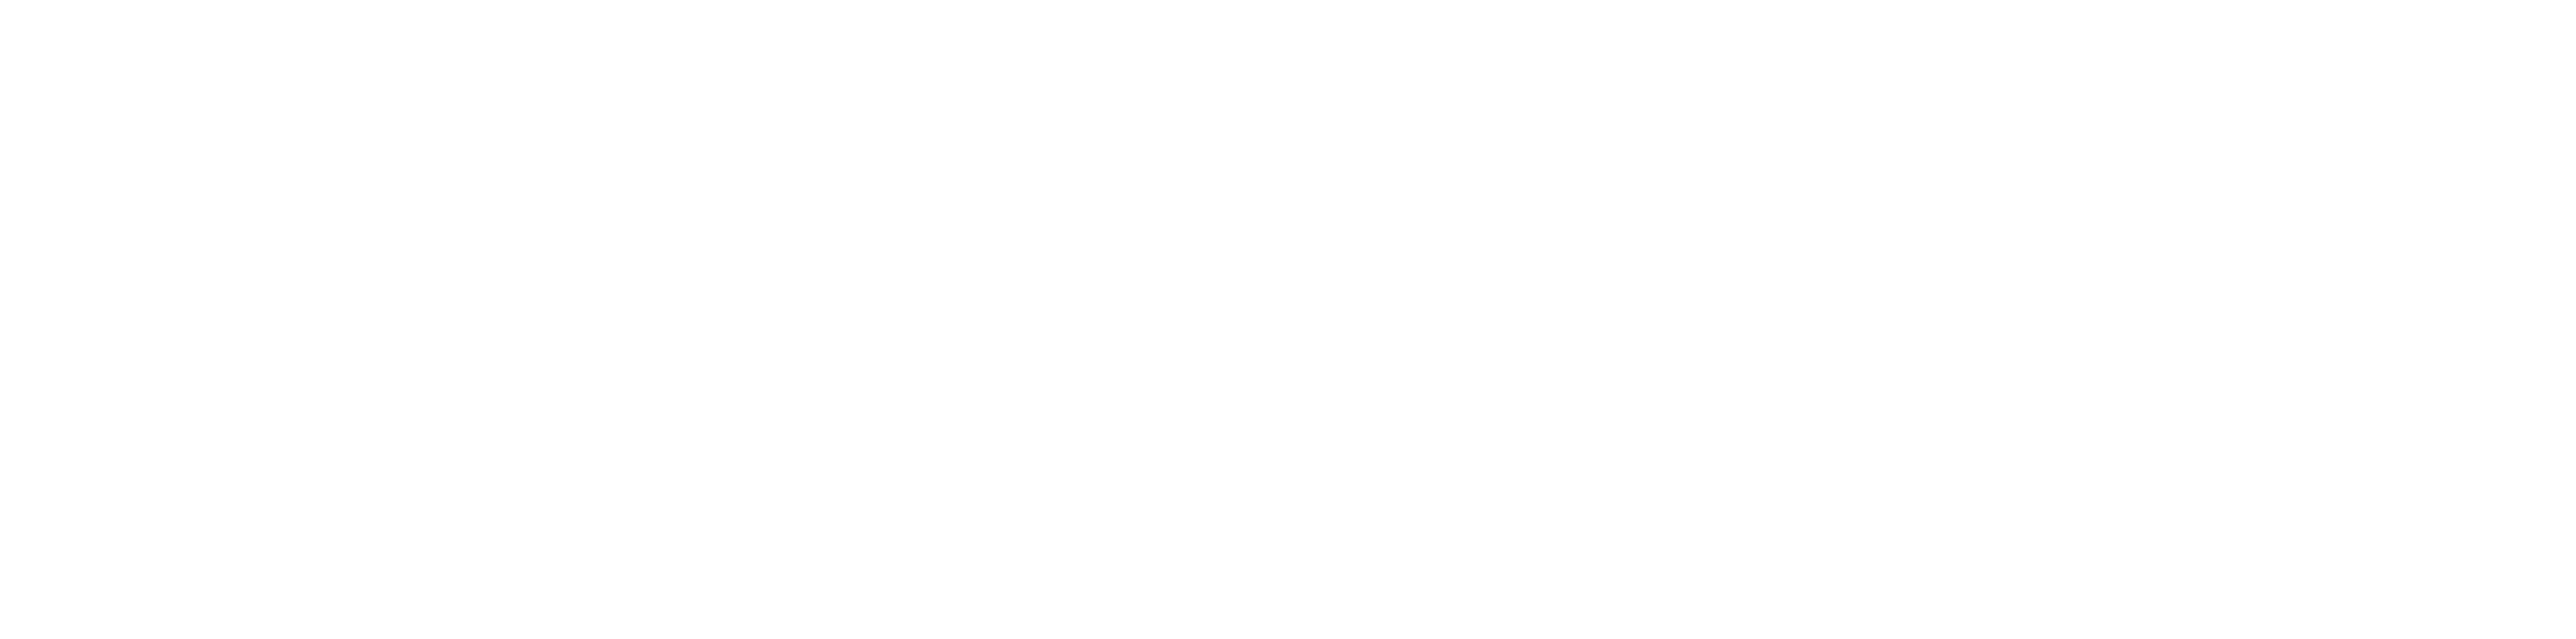 Russell Bedford Logo